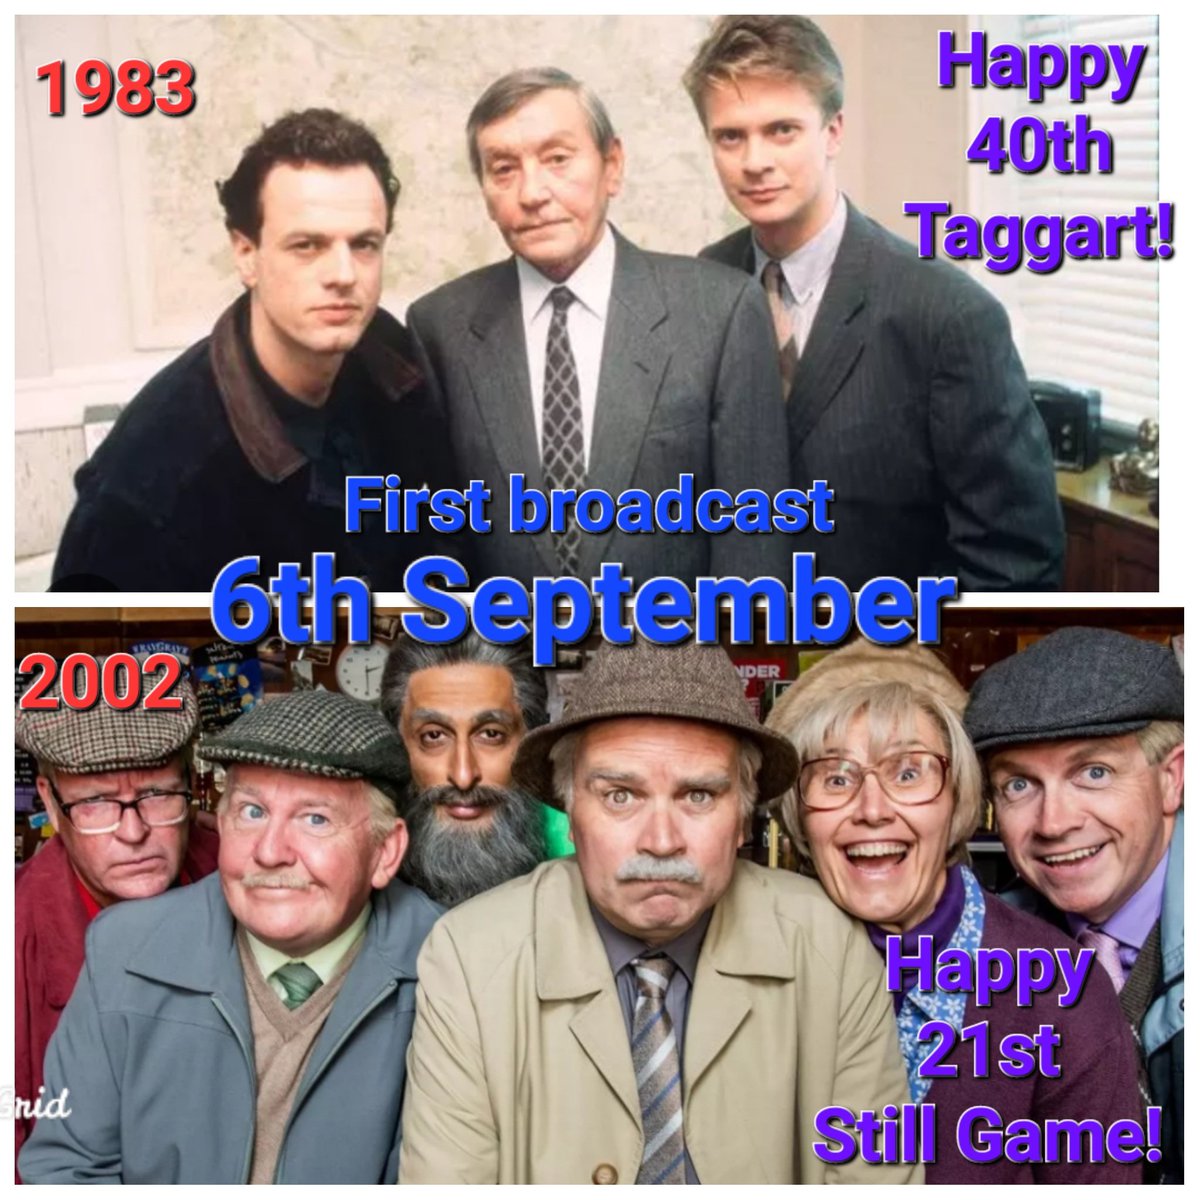 Two great Scottish TV institutions celebrating significant anniversaries today. Its a ruby ♦️ for Taggart, and the Key to the Door 🗝  for Still Game! #Taggart #StillGame #ScottishTV #TheresBeenAMurder #JackAndVictor #40th #21st #MarkMcManus